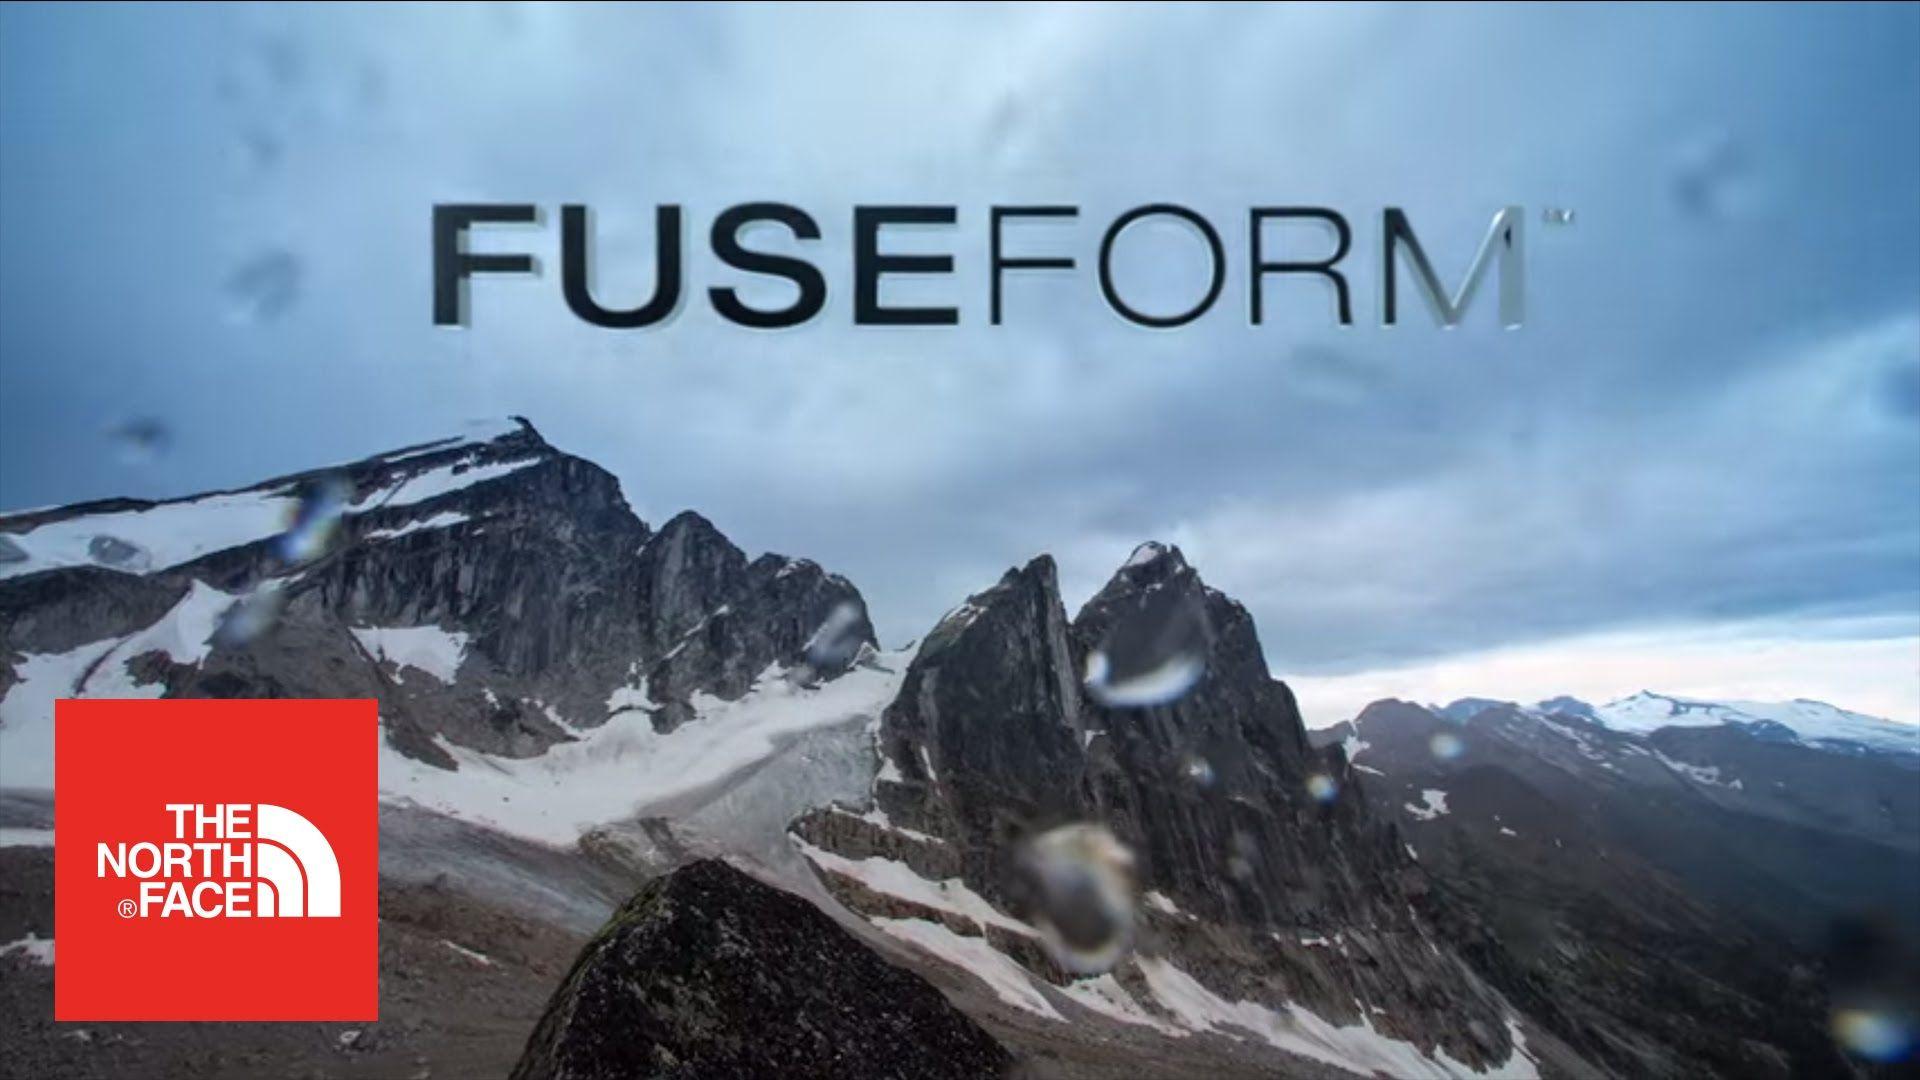 The North Face: FuseForm